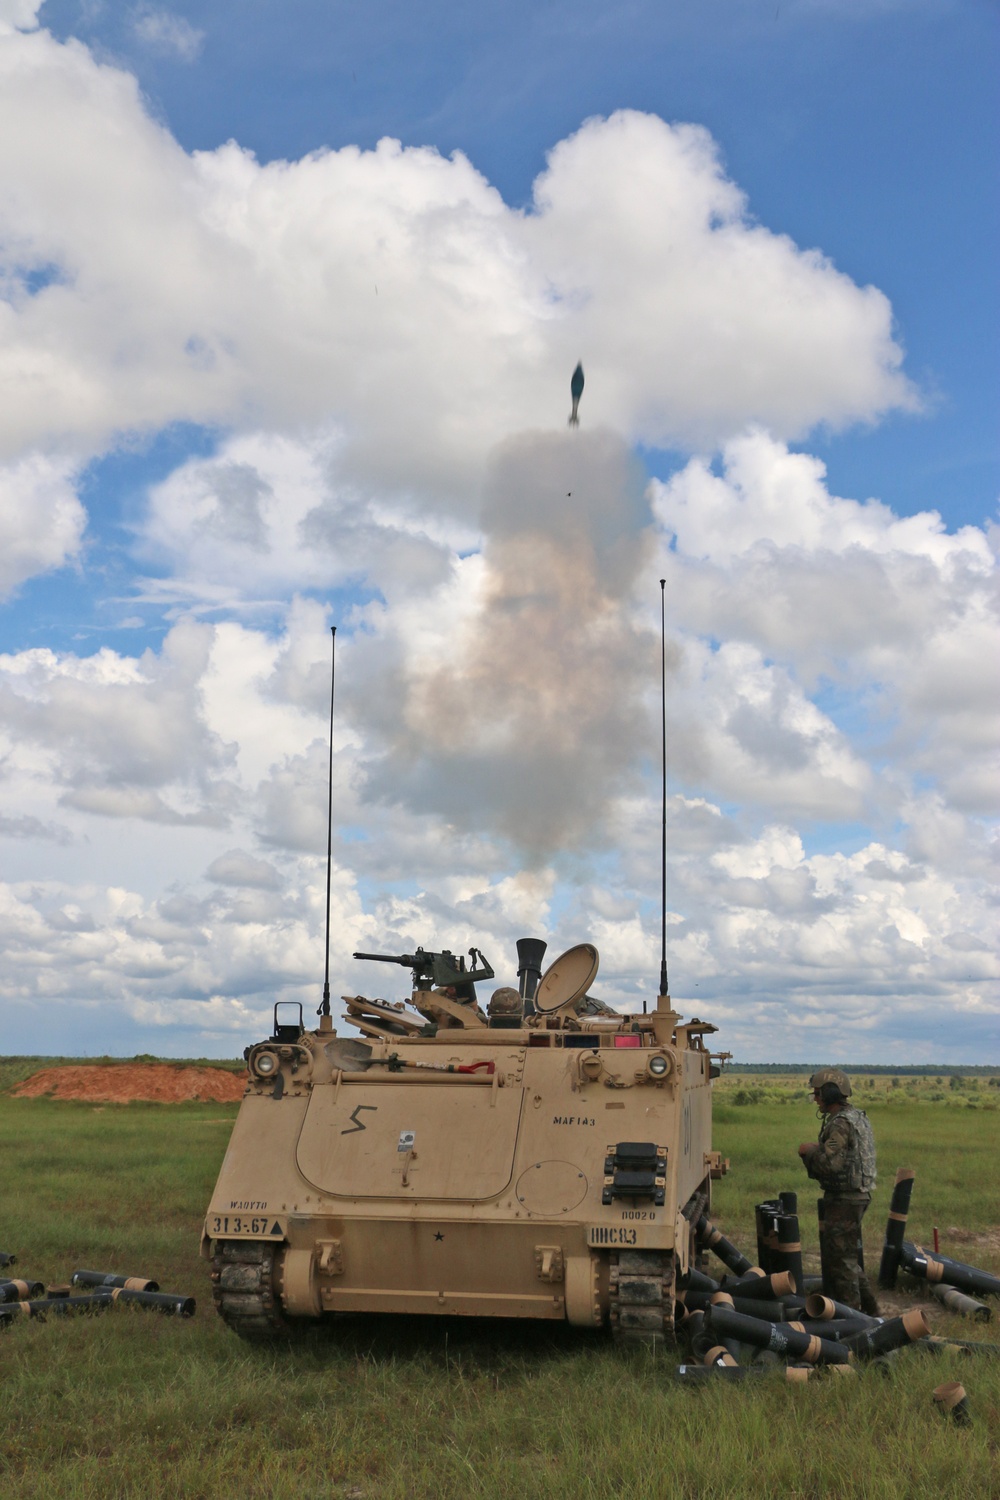 3-67 AR conducts mortar live fire training